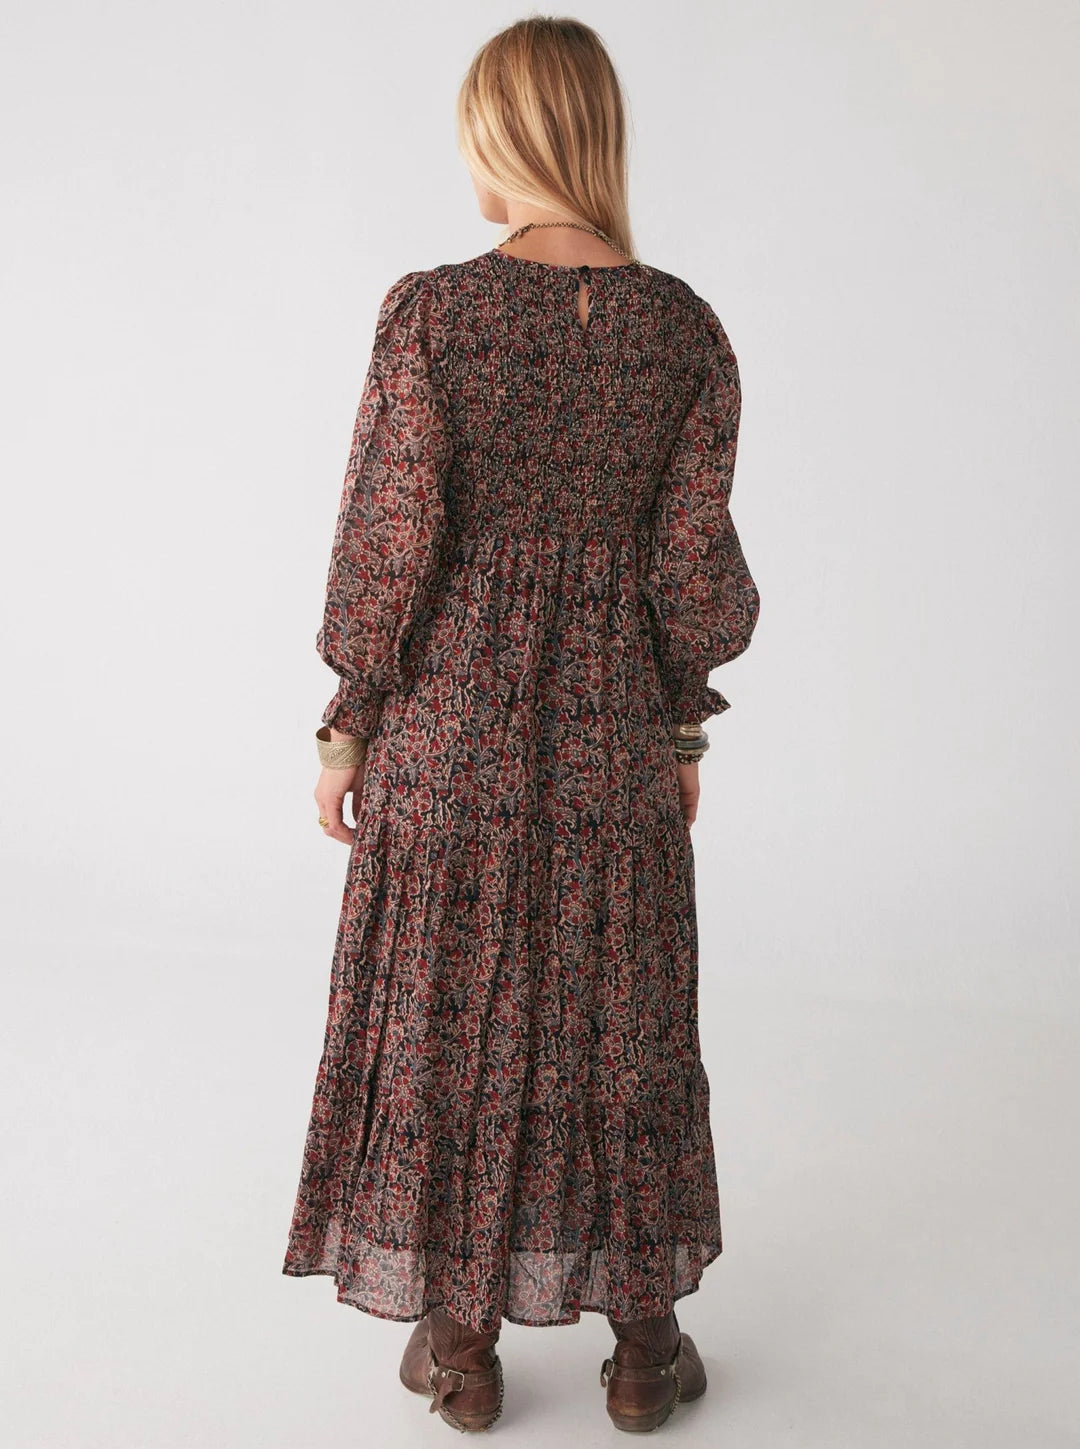 Lily Dress - Black Forest